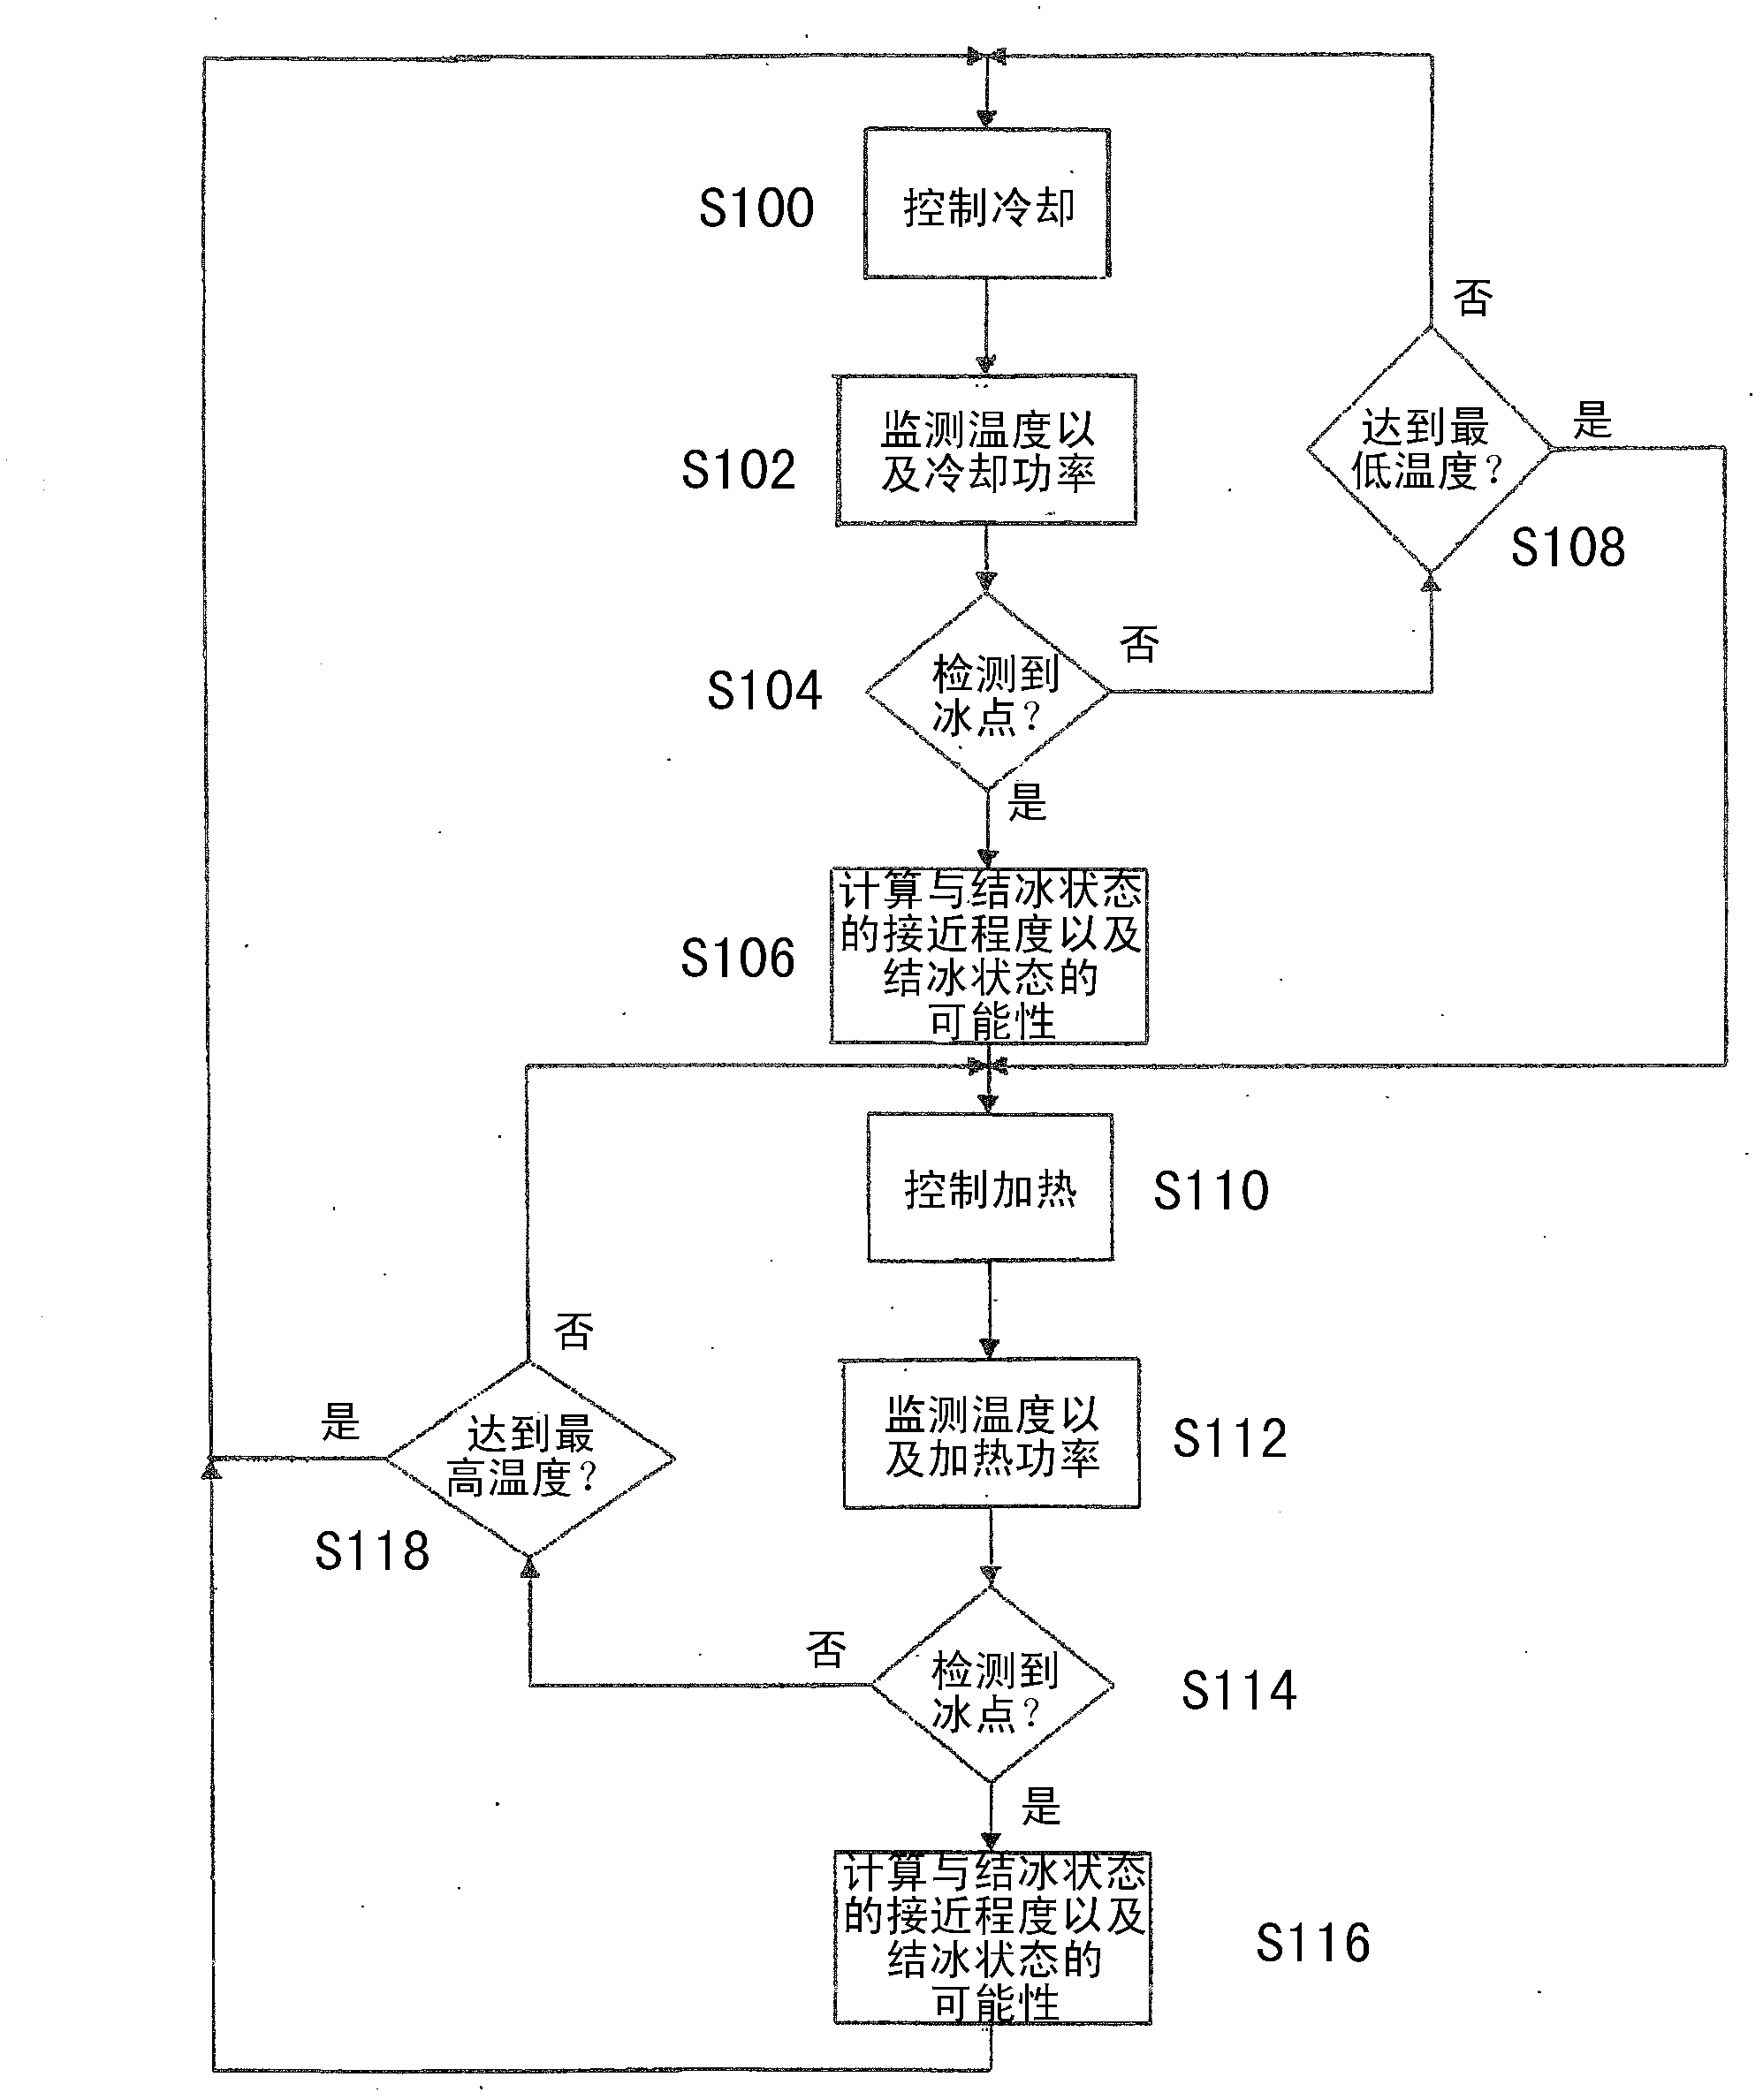 Icing sensor system and method